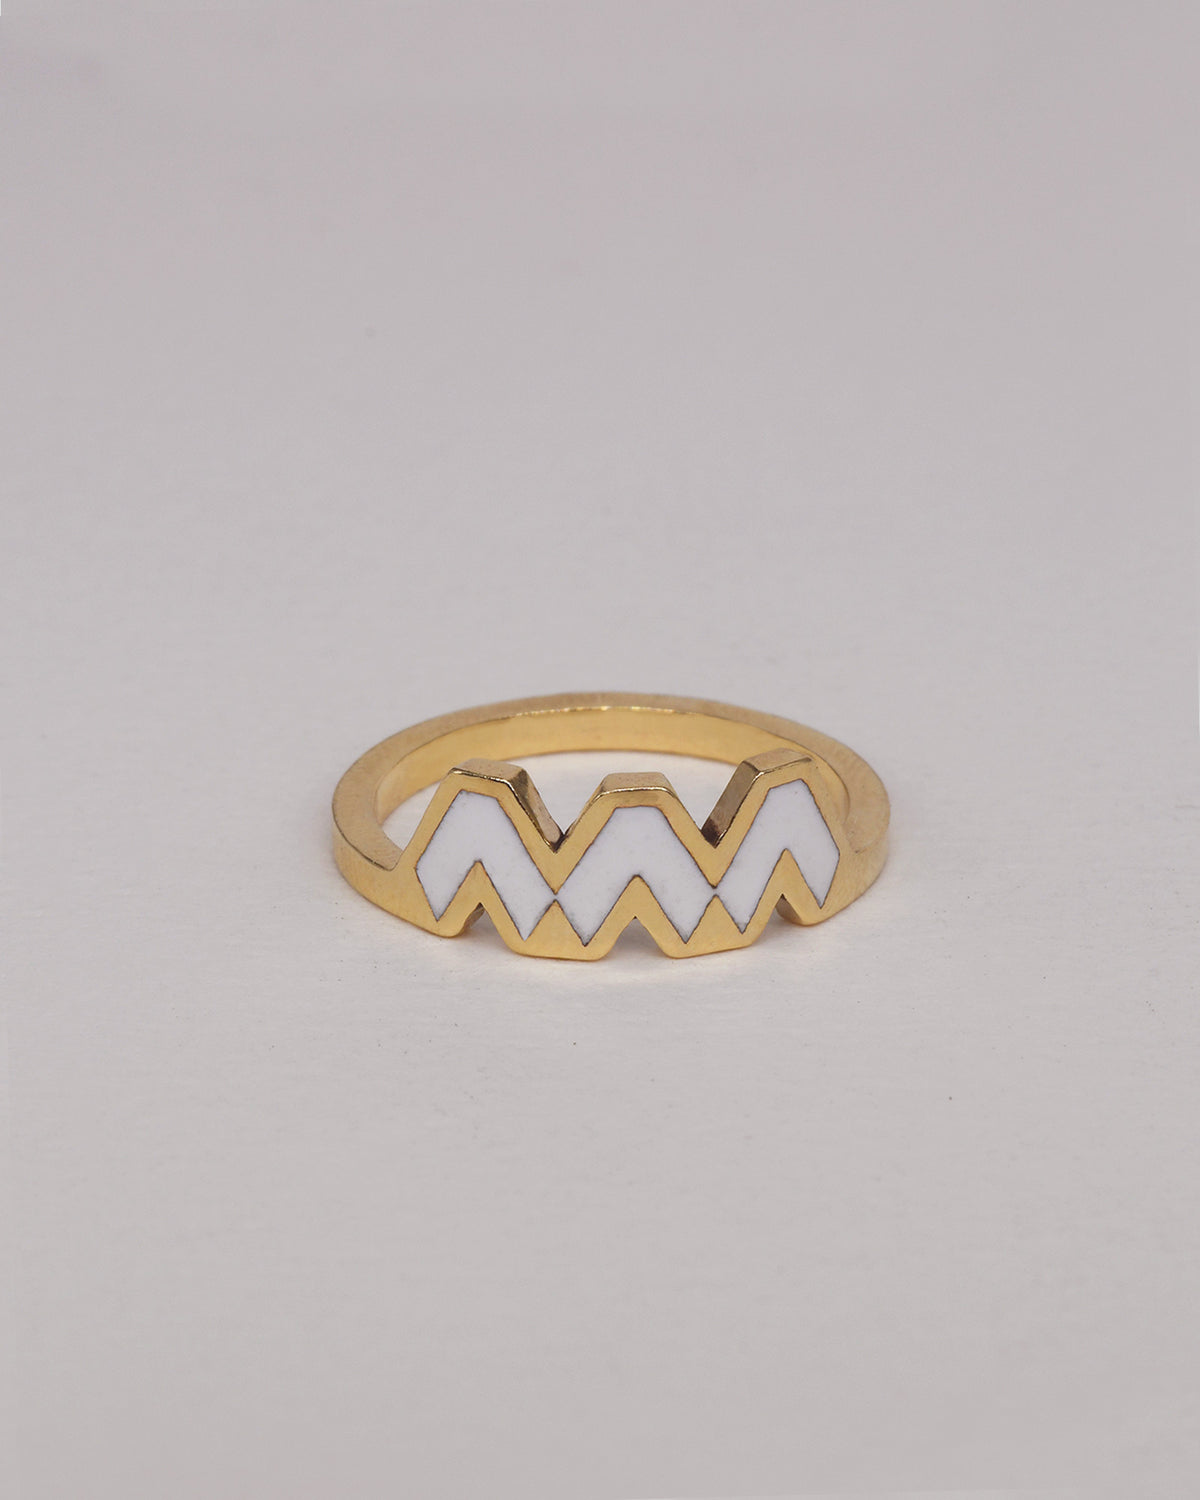 The Waves Ring